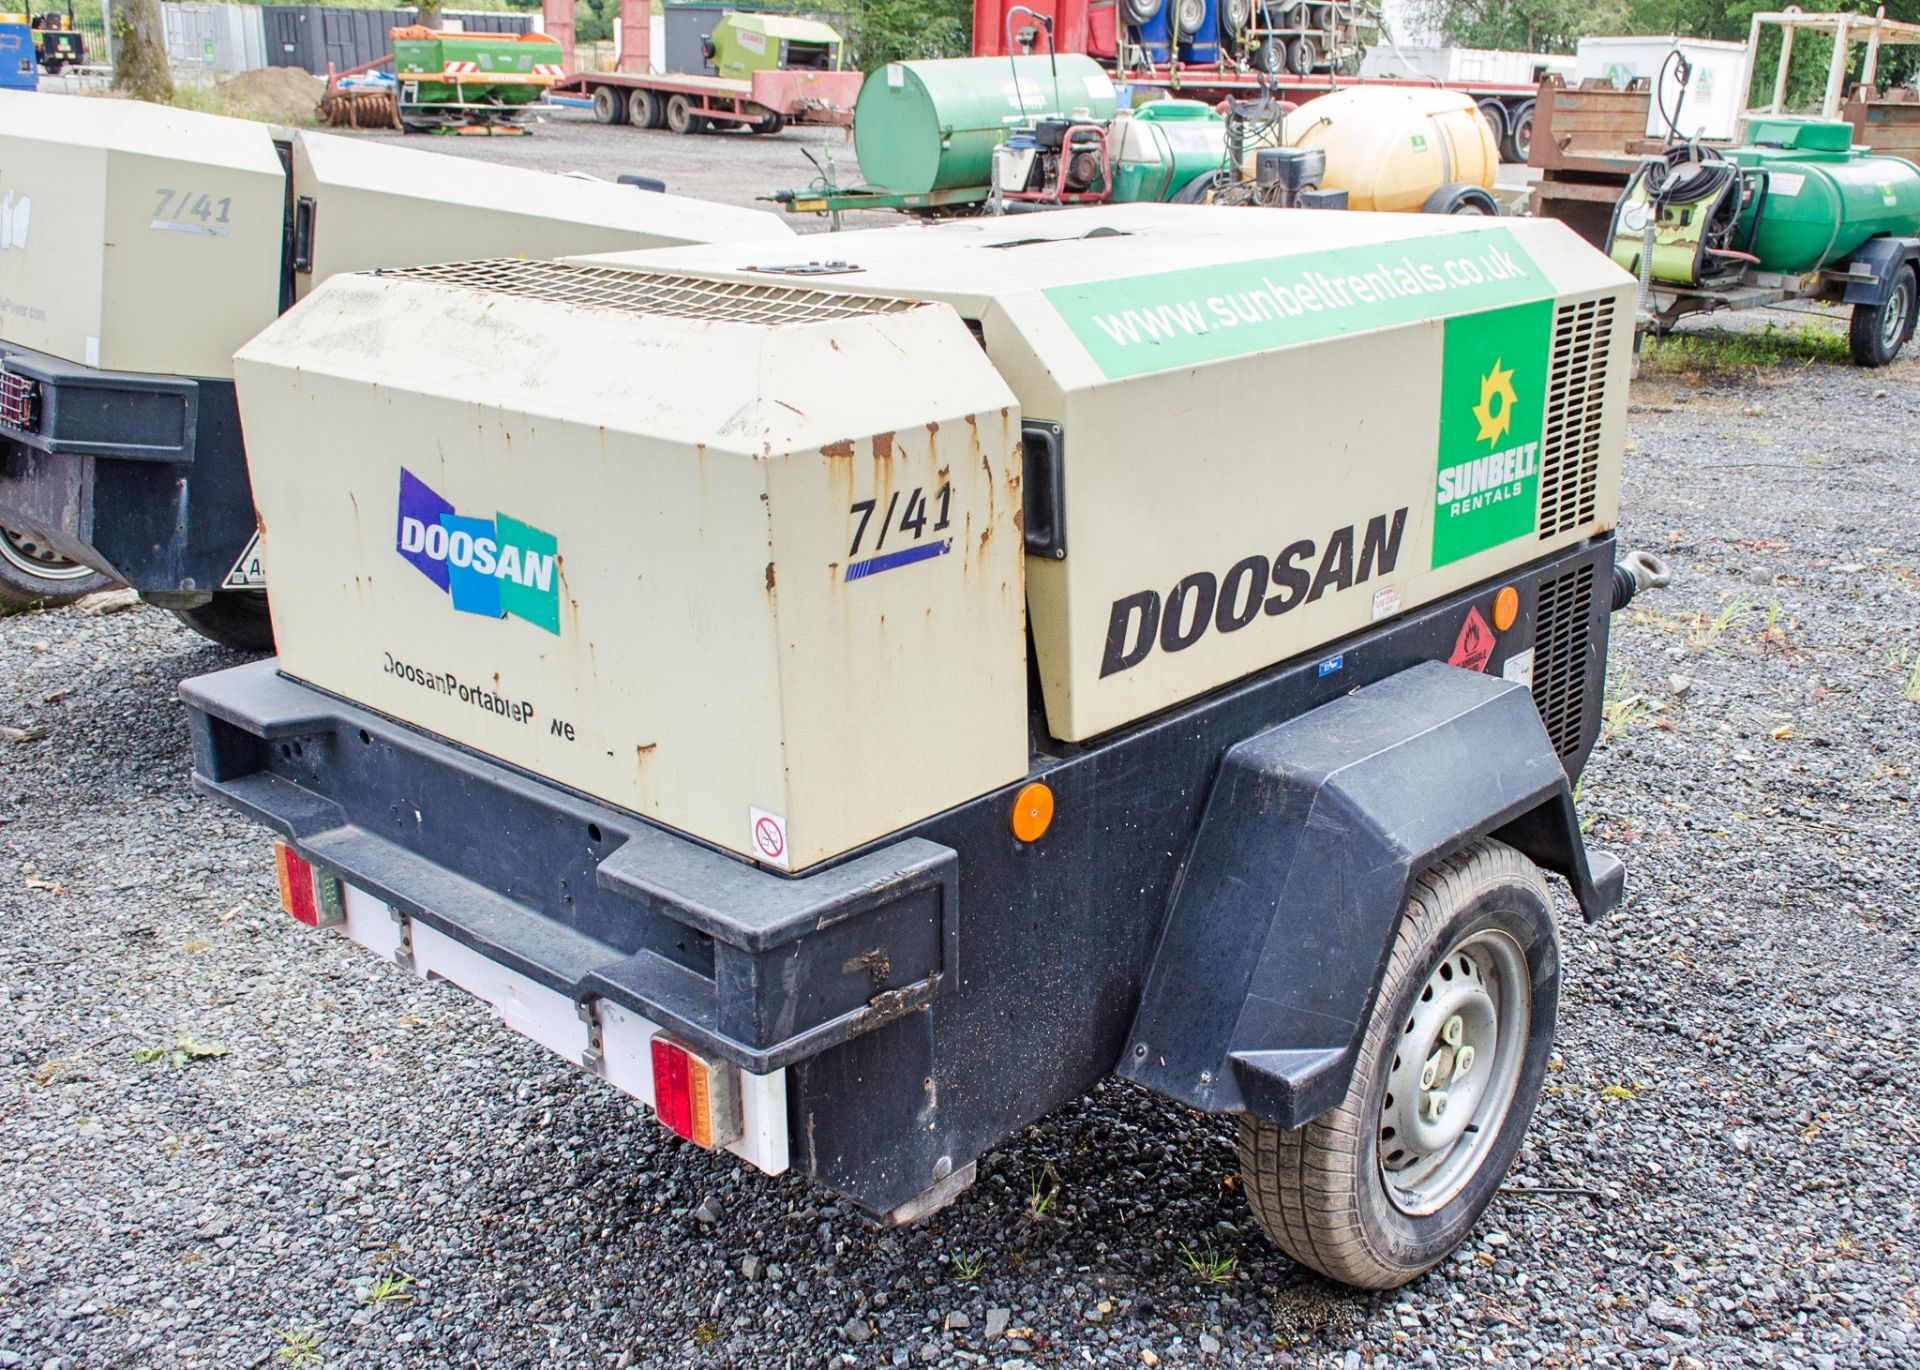 Doosan 7/41 diesel driven fast tow diesel driven air compressor Year: 2016 S/N: 434117 Recorded - Image 2 of 6